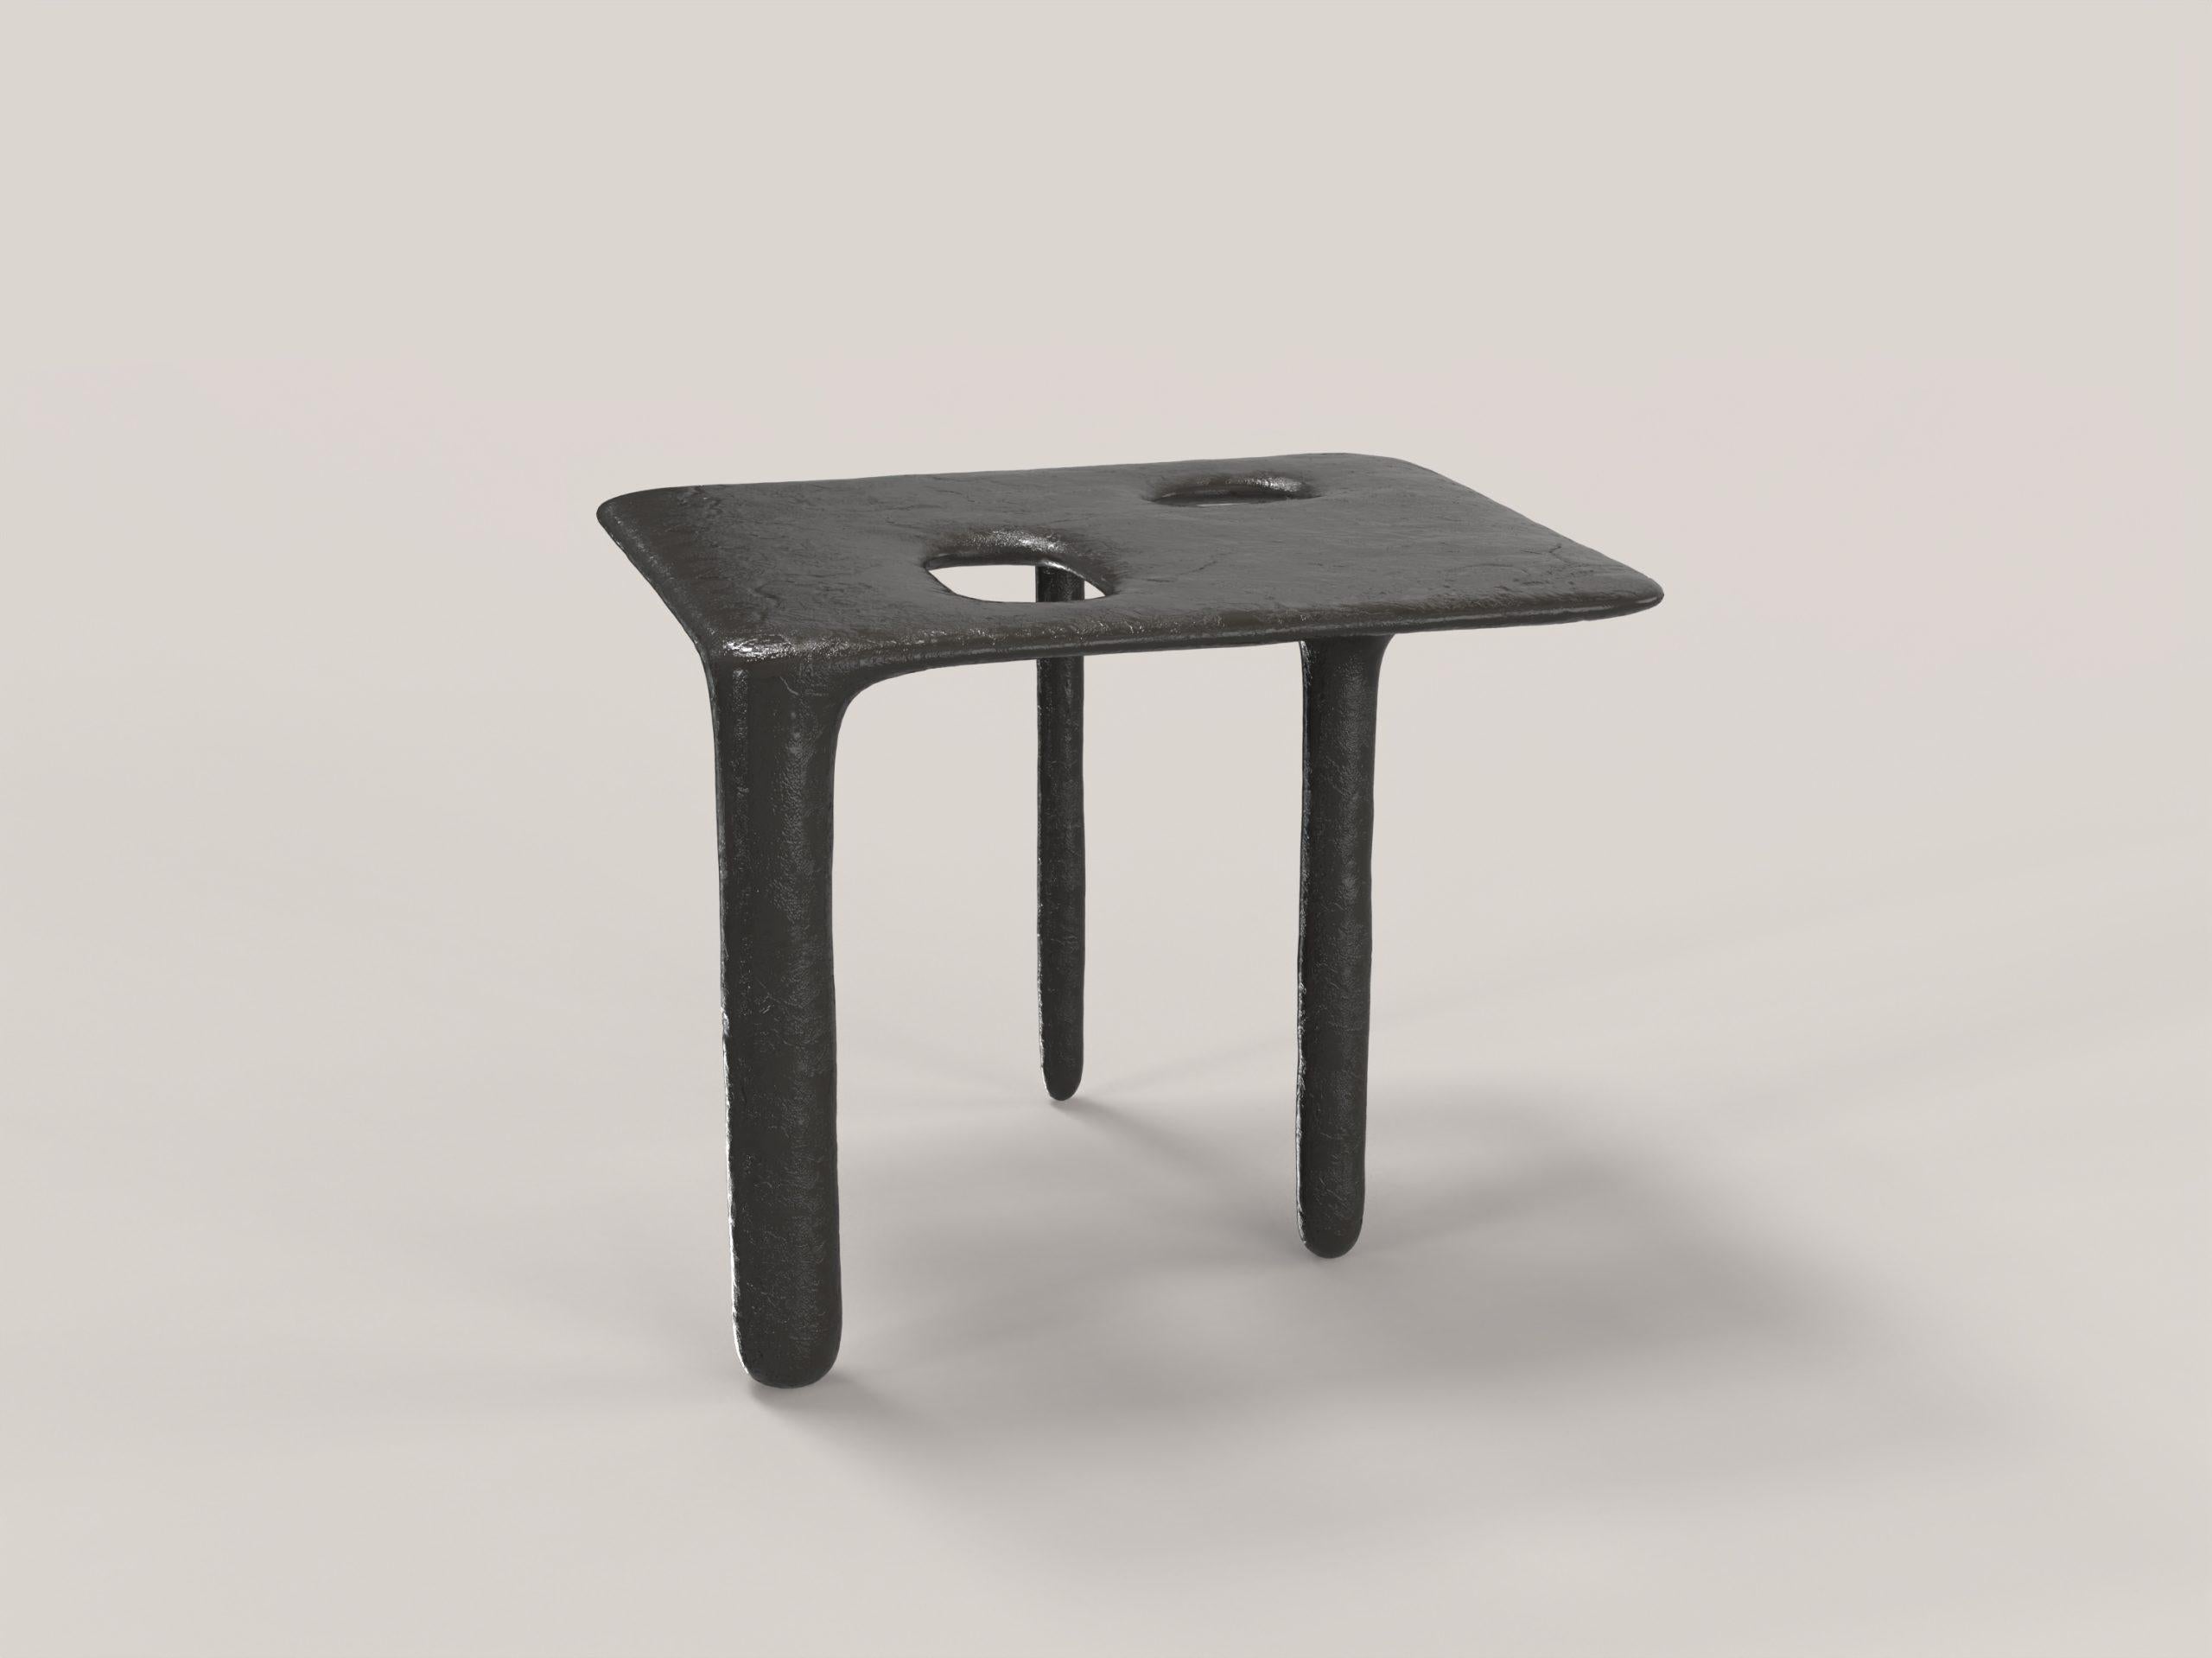 Set of 2 Oasi V1 and V2 Low Tables by Edizione Limitata For Sale 1